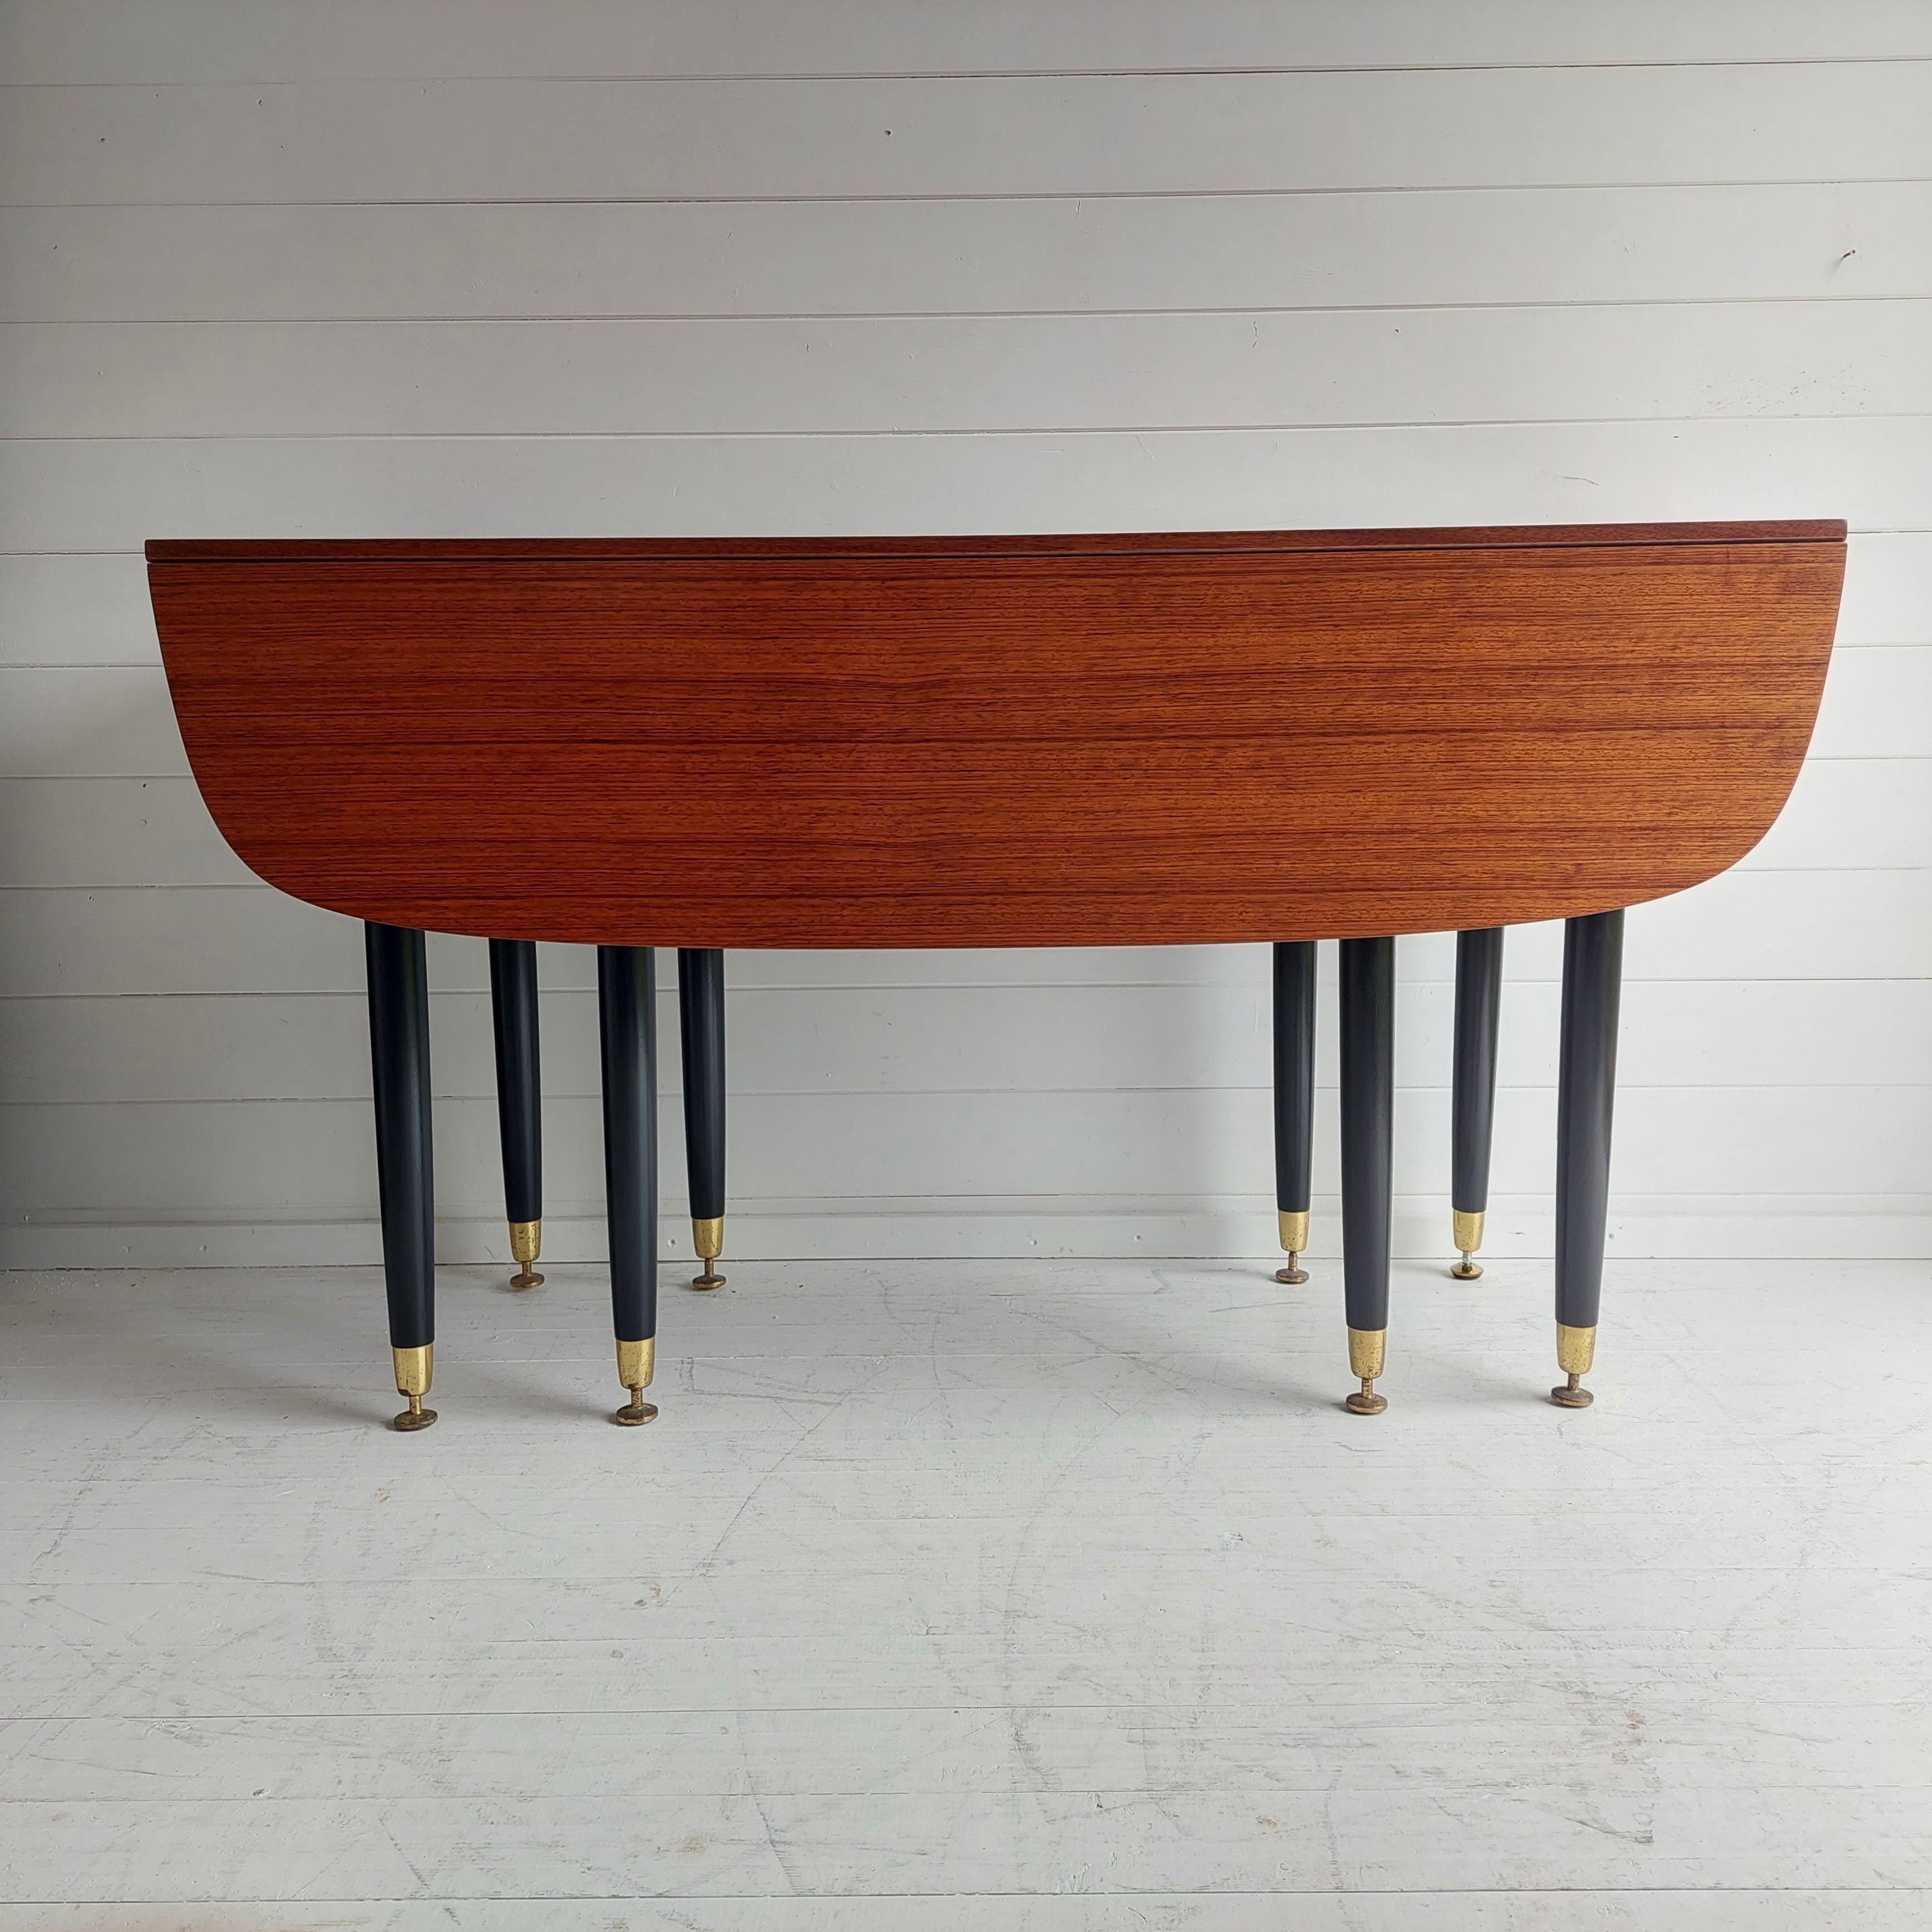 A striking example of mid century E Gomme, G plan dining furniture. 
Dated 1959 the elegant combination of black, gold and dark wood encapsulates the signature style typical of 1950's MCM design.

It is made of tola on the top and black in the